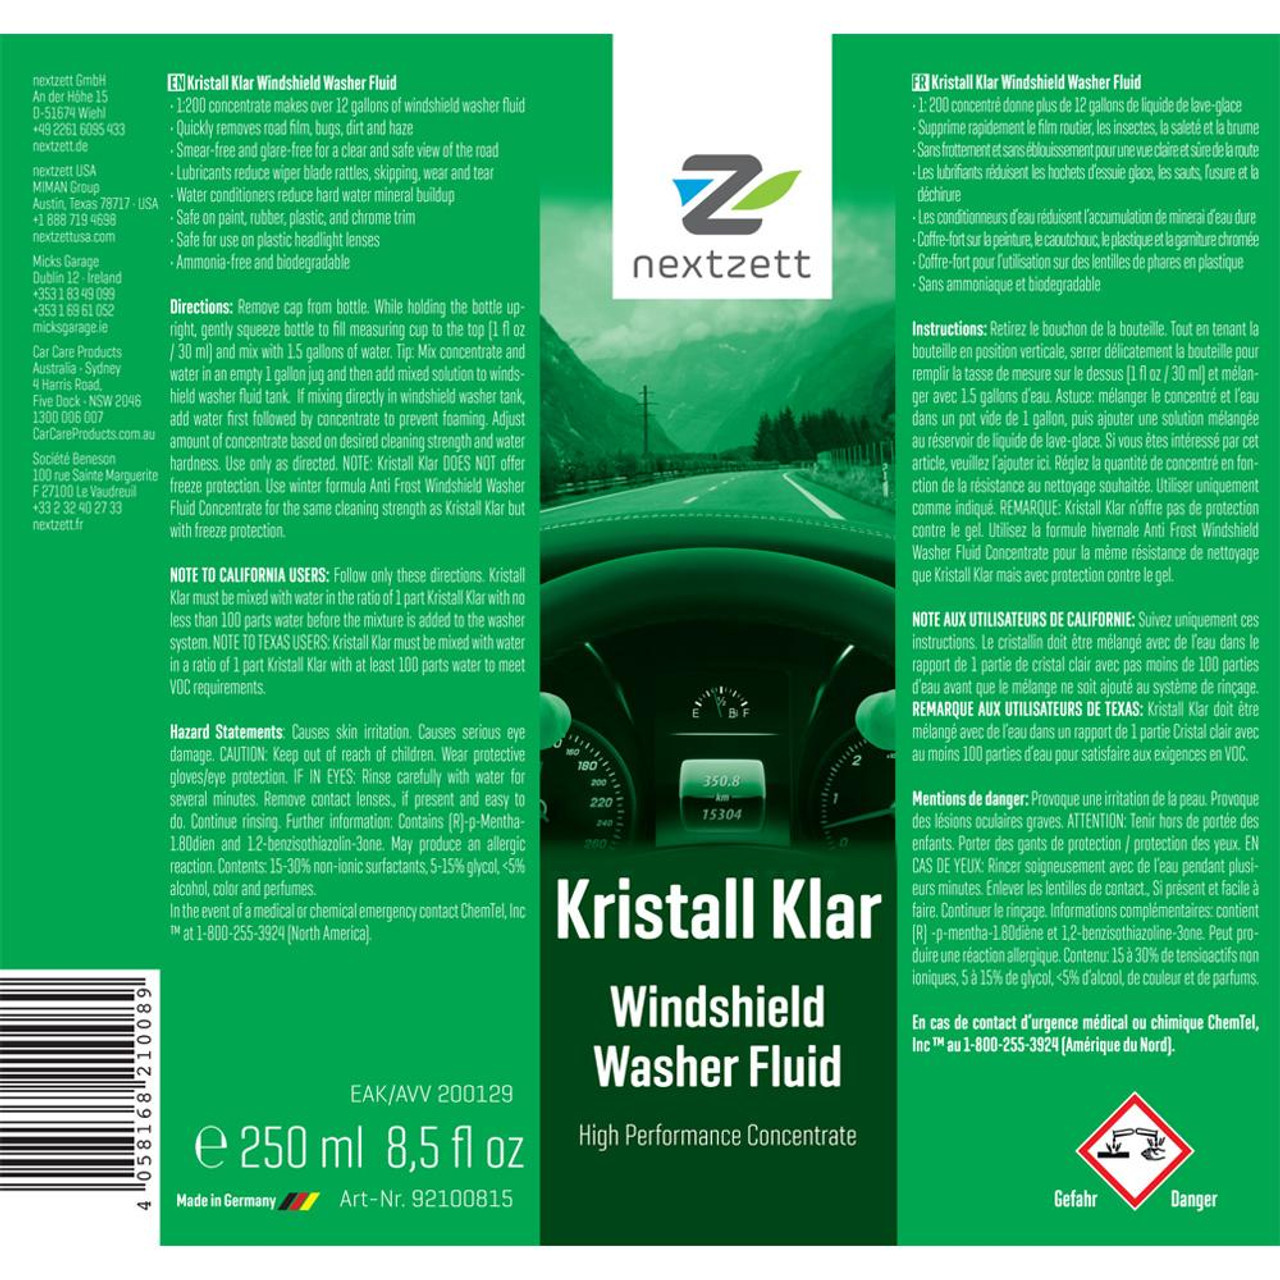 Kristall Klar Windshield Washer Fluid Concentrate Makes 1350